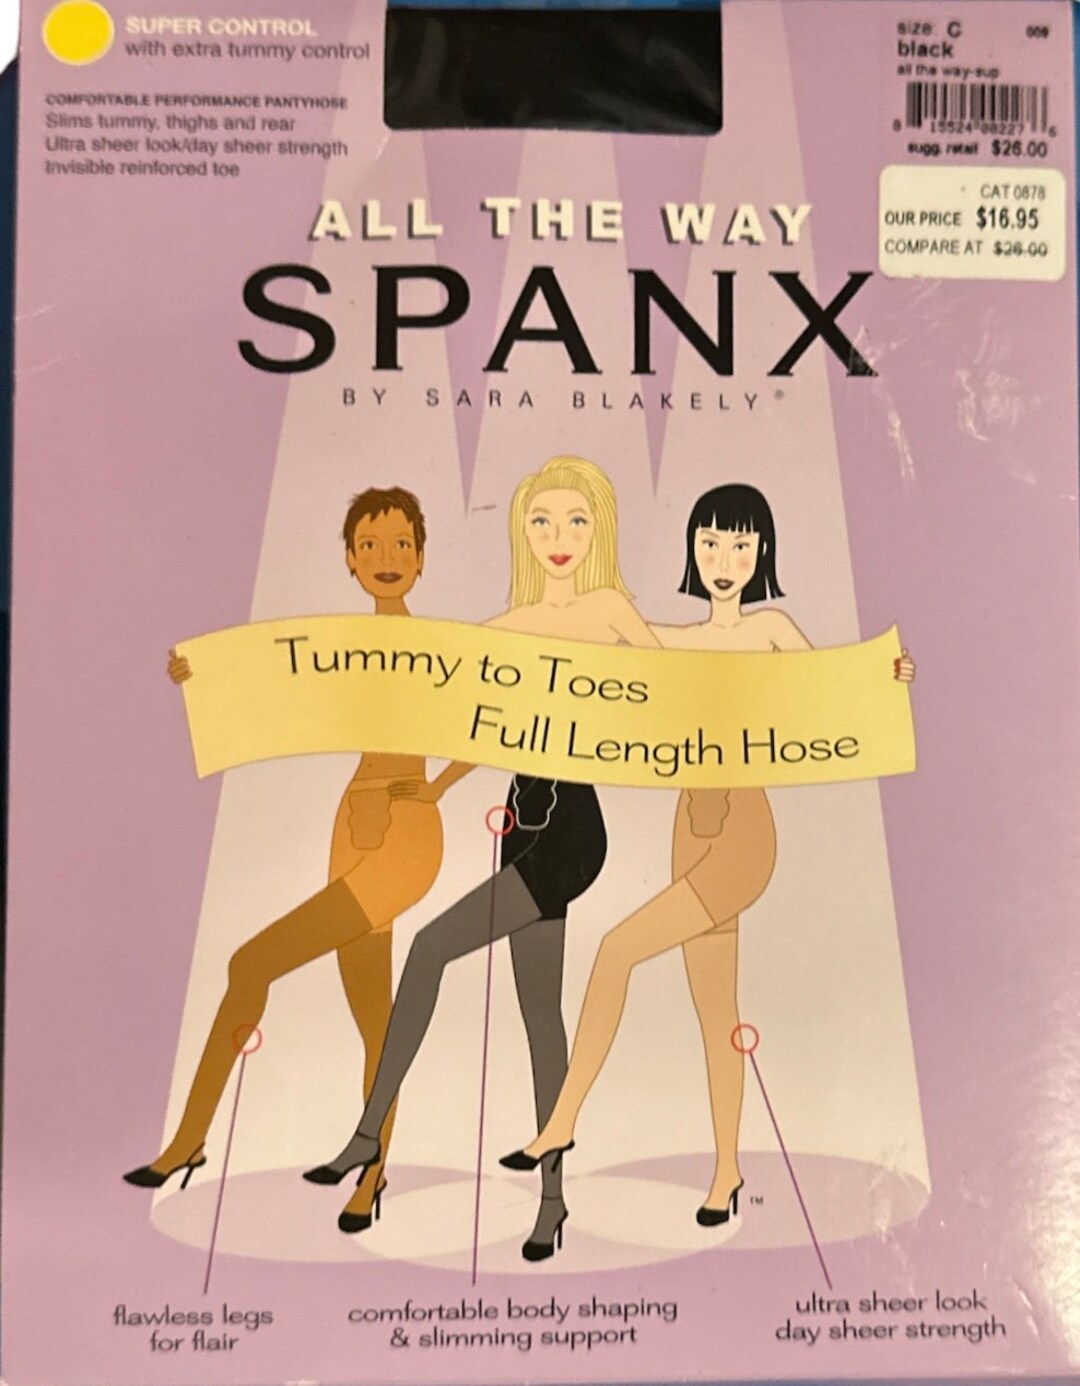 All the Way Spanks Tummy to Toes, Full Length Hose,blk,size C, 50